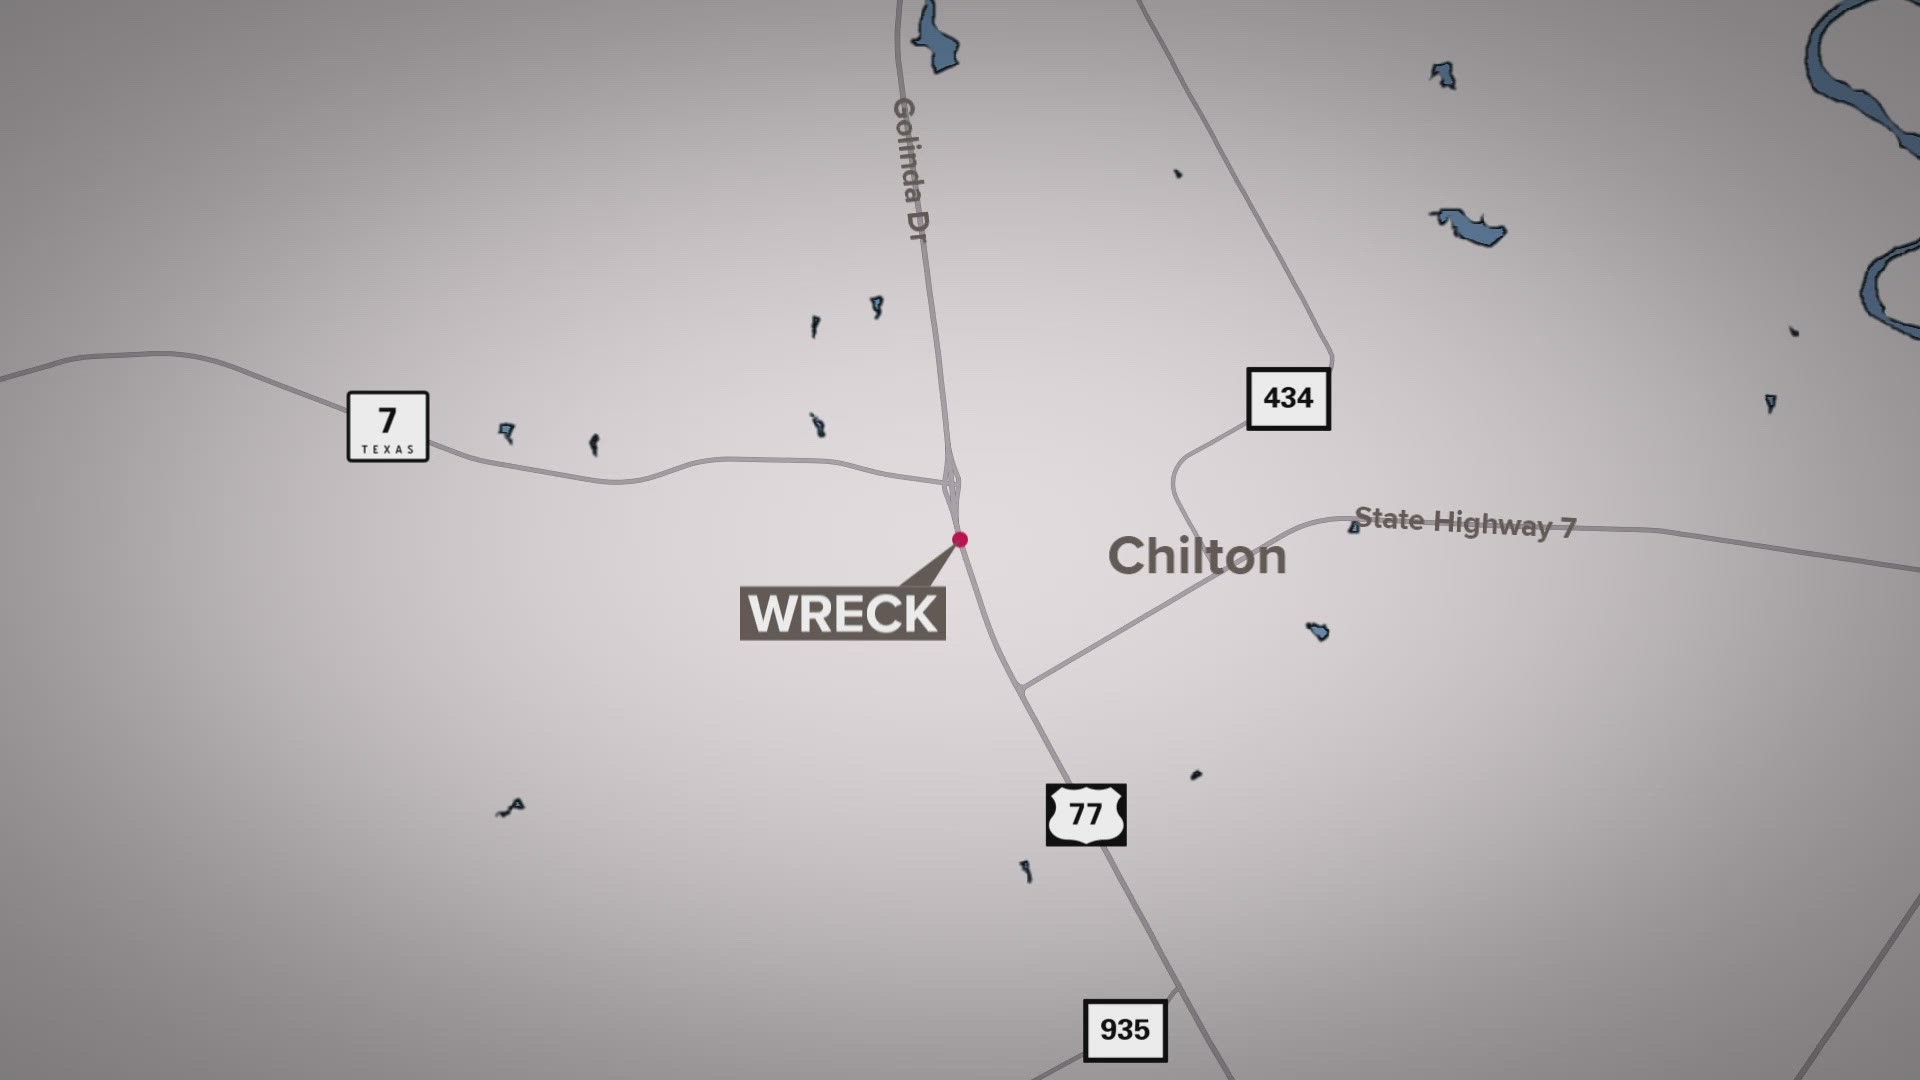 DPS identified two of the victims as Sherrie Holt of Chilton and Michelle McCoy of Arlington.